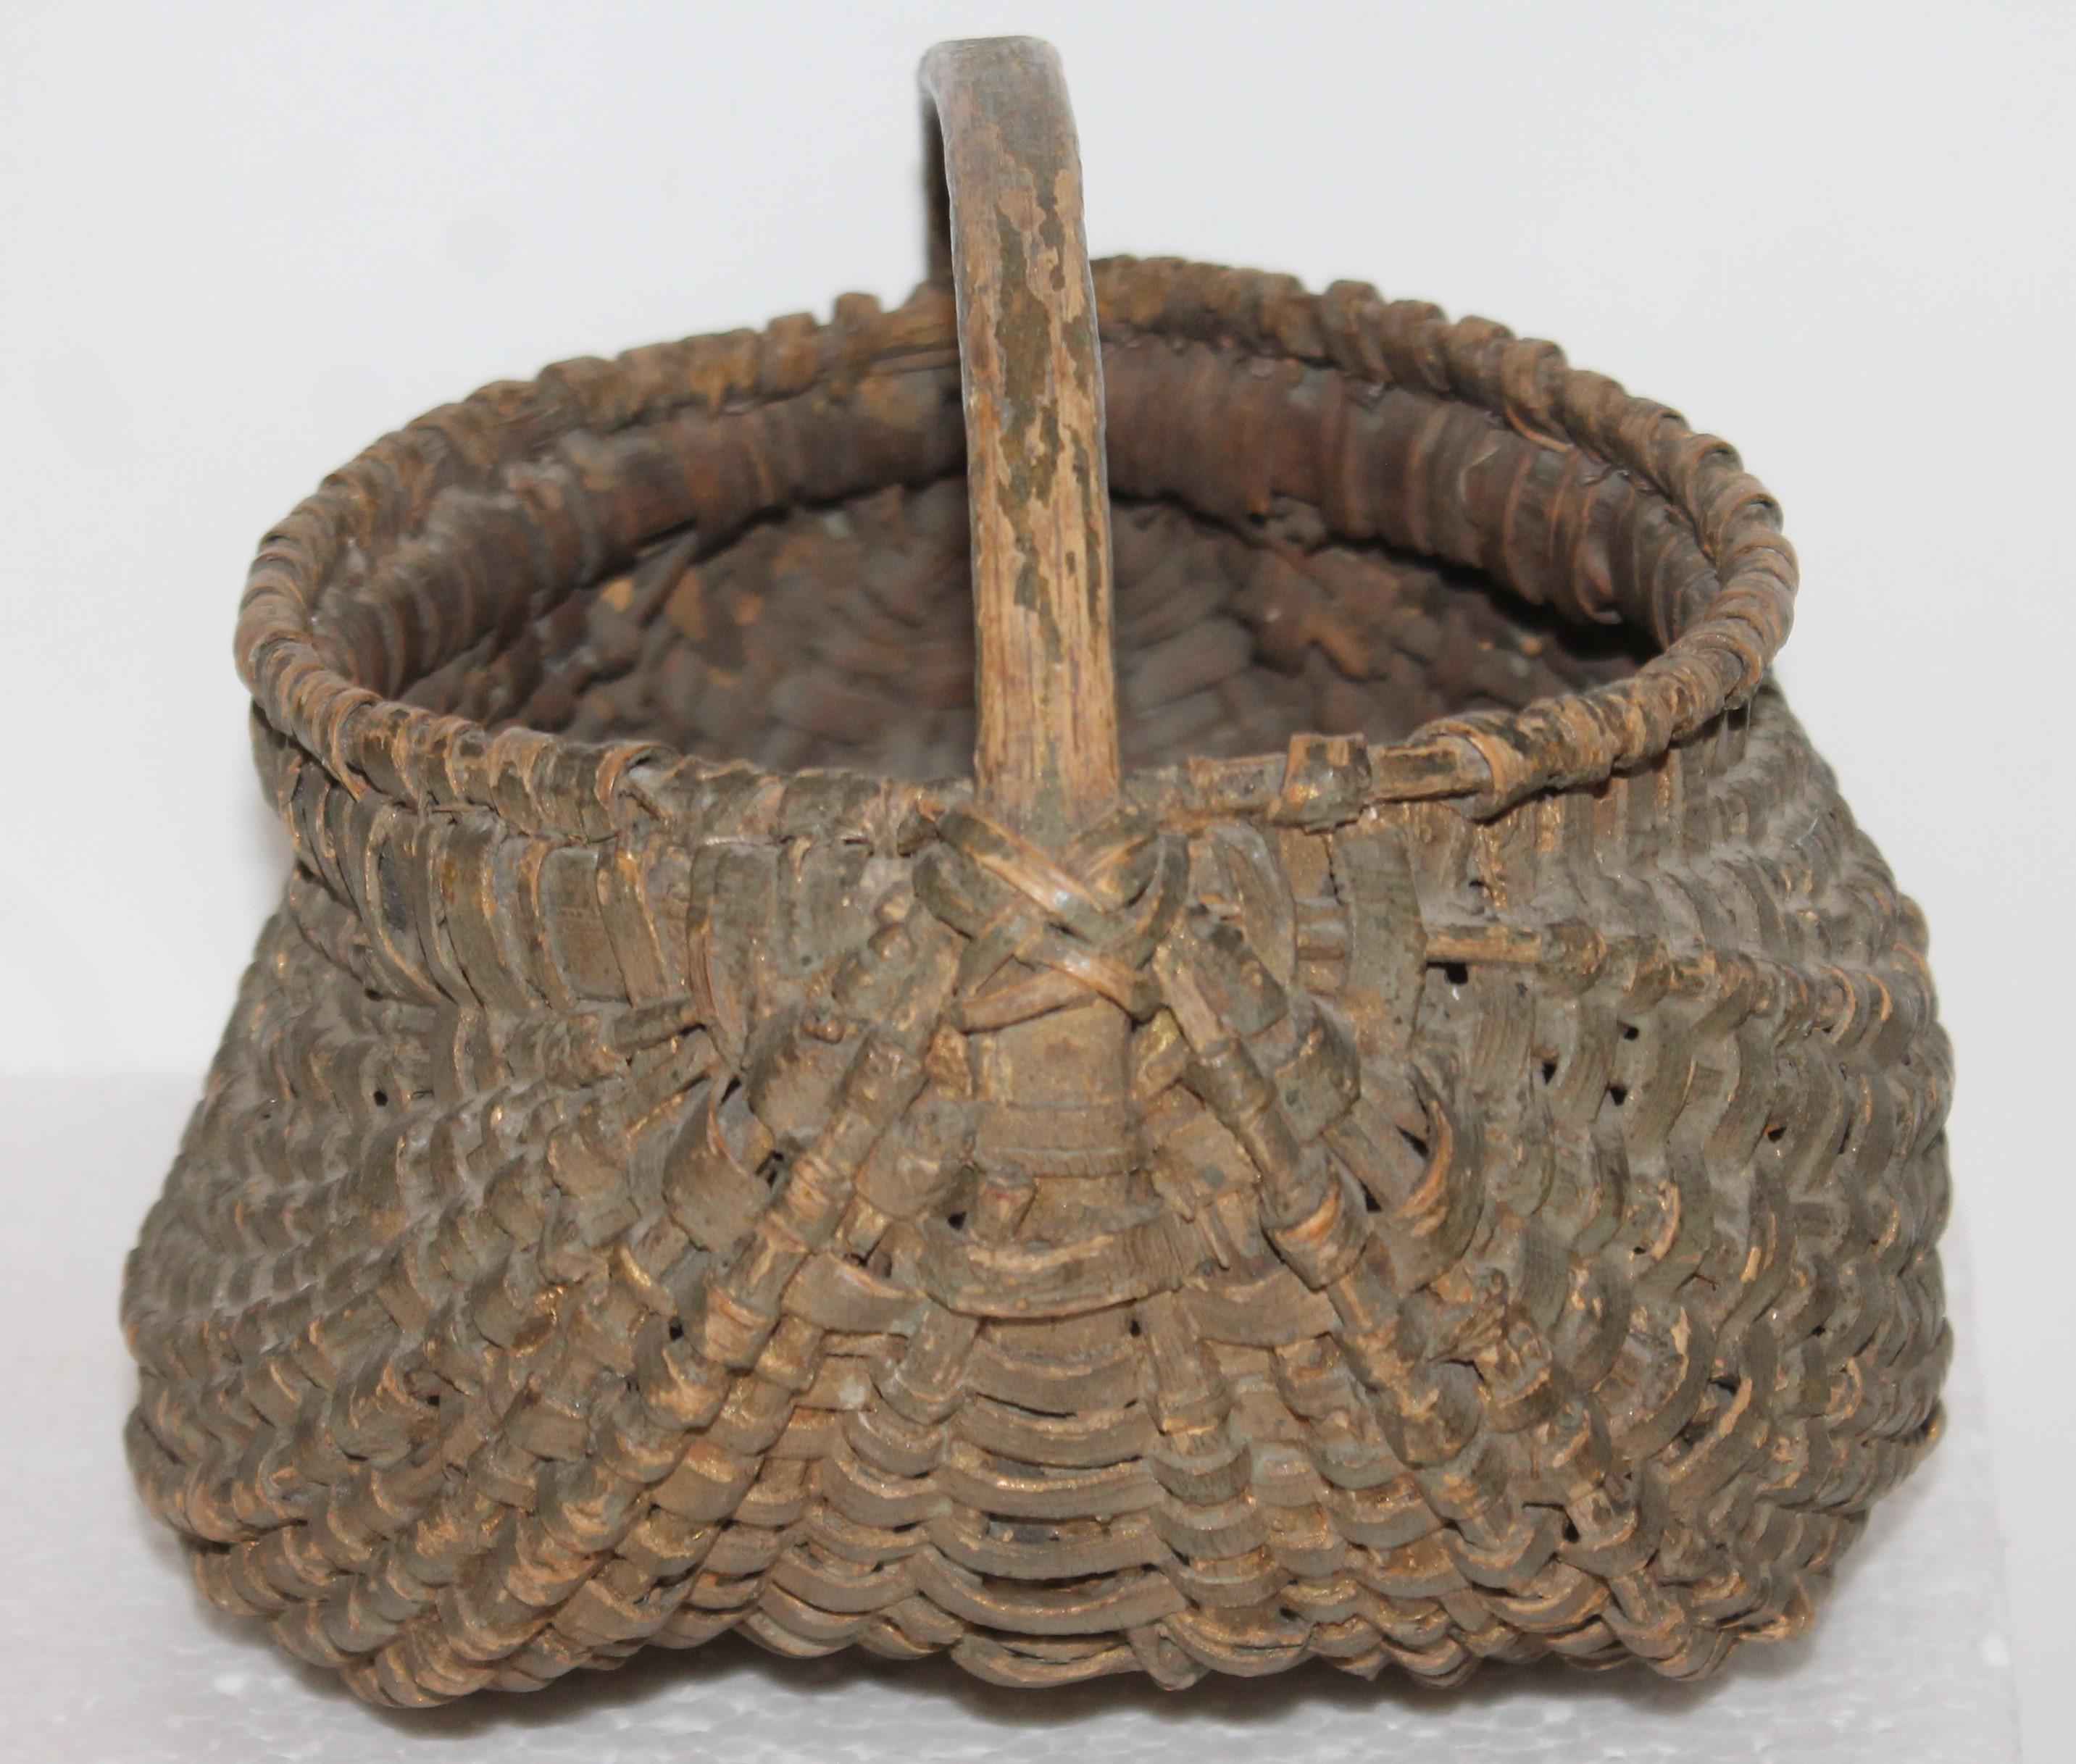 This fine original sage green hiney basket is in pristine condition. This early beauty has old gilded on the base. Buttocks basket Measures -
7 deep x 8 wide x 6 high. The condition is very good.
  